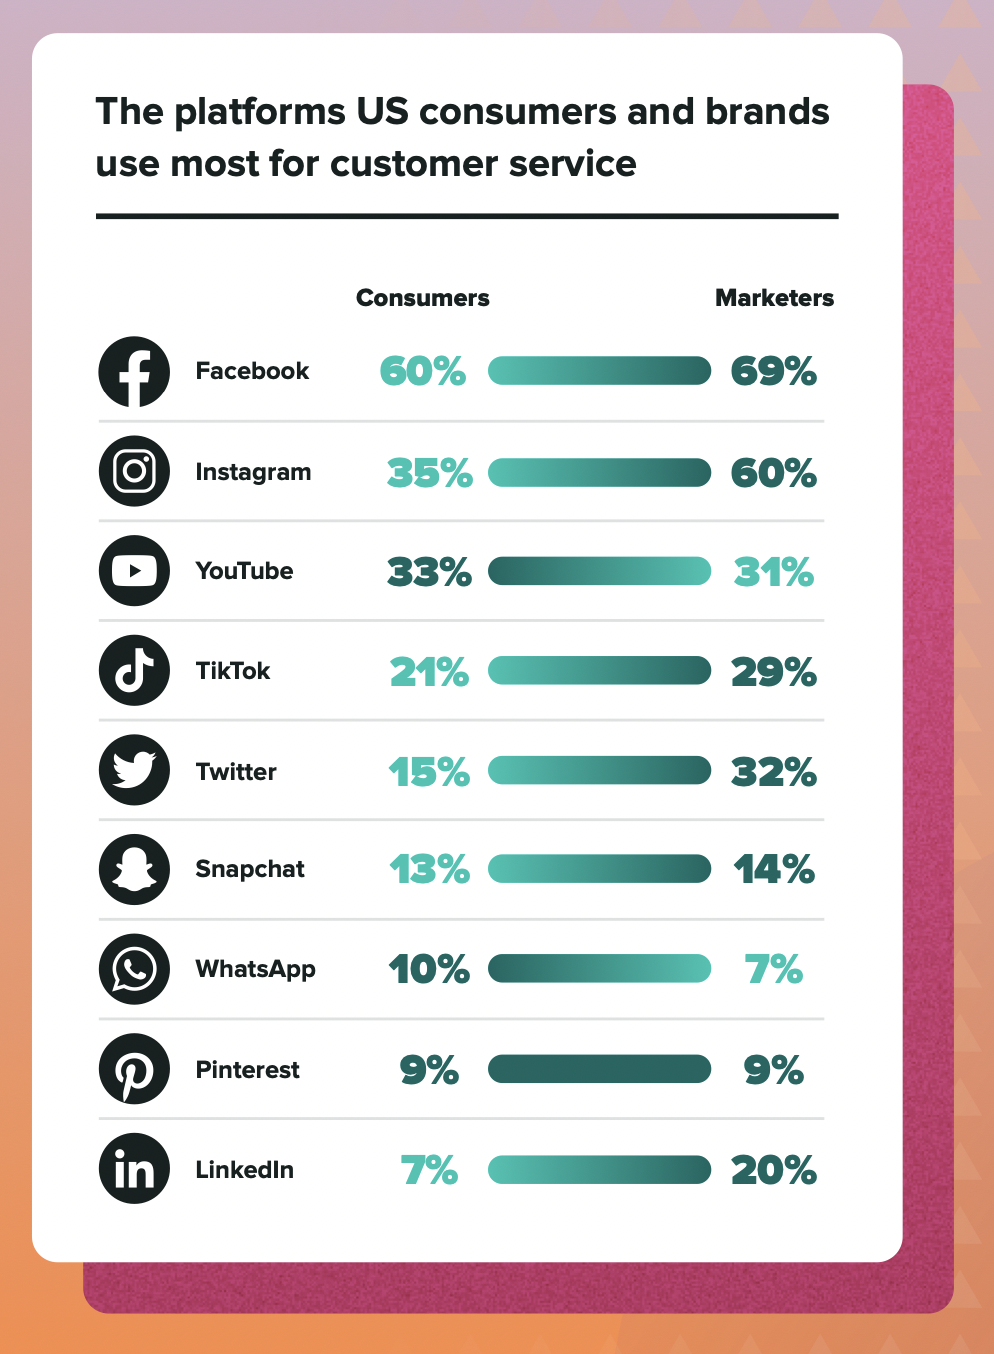 chart comparing the number of consumers and marketers who use different social media platforms for customer service